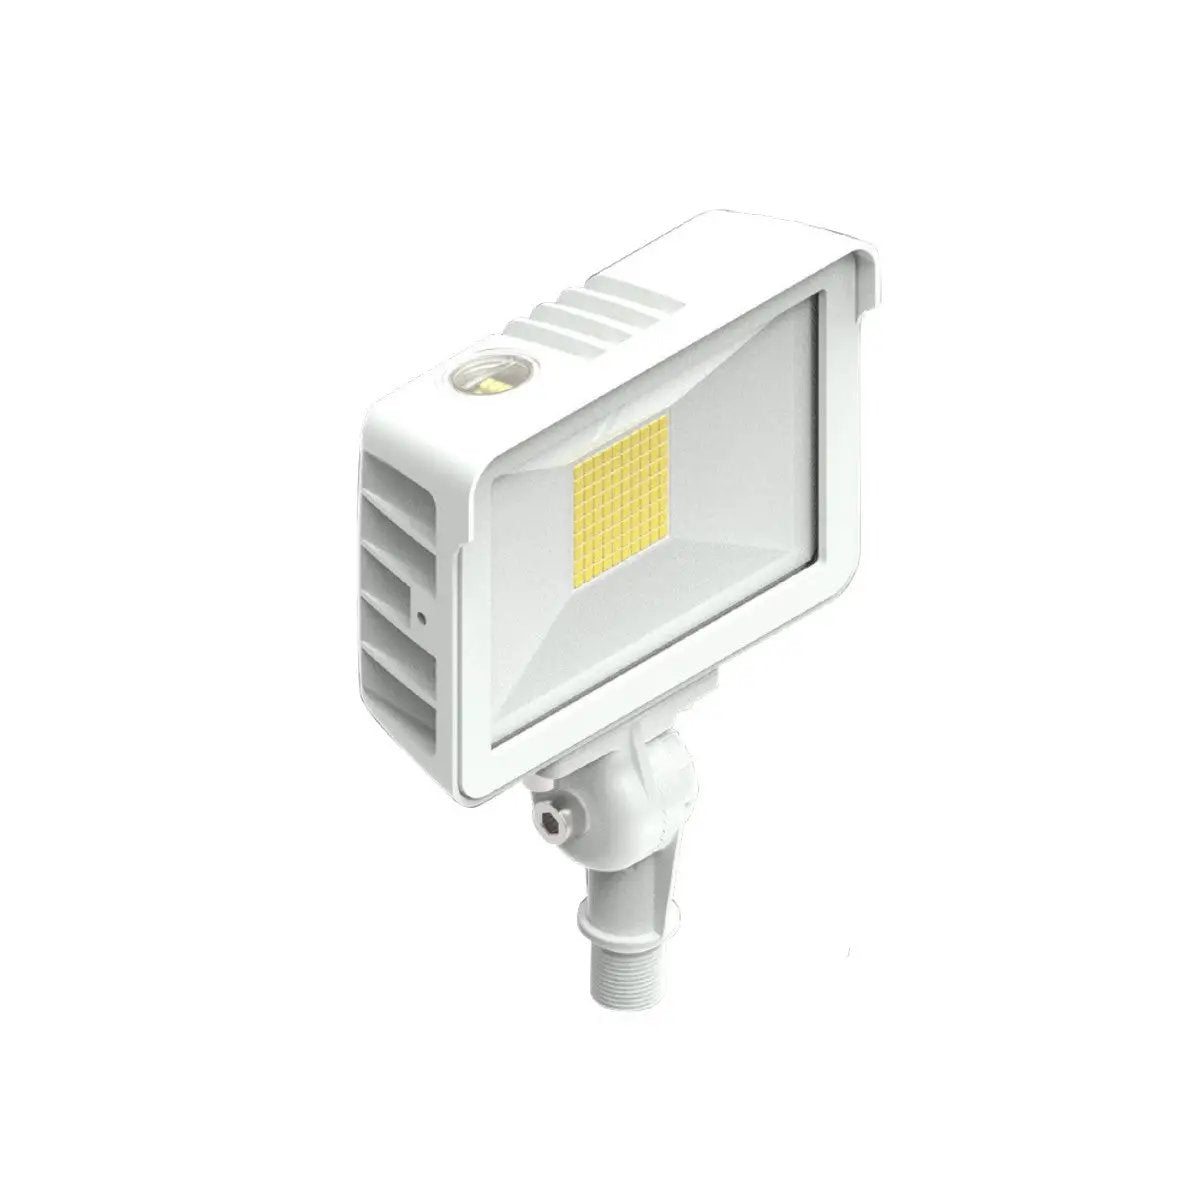 Outdoor Flood Lighting Fixture with color adjustable white light, universal mounting options, and built-in photocell for energy savings. 2175 lumens, 15W LED, 3000K-5000K color temperature. UL Listed, IP65 Rated, DLC Premium Listed. 5-year warranty.